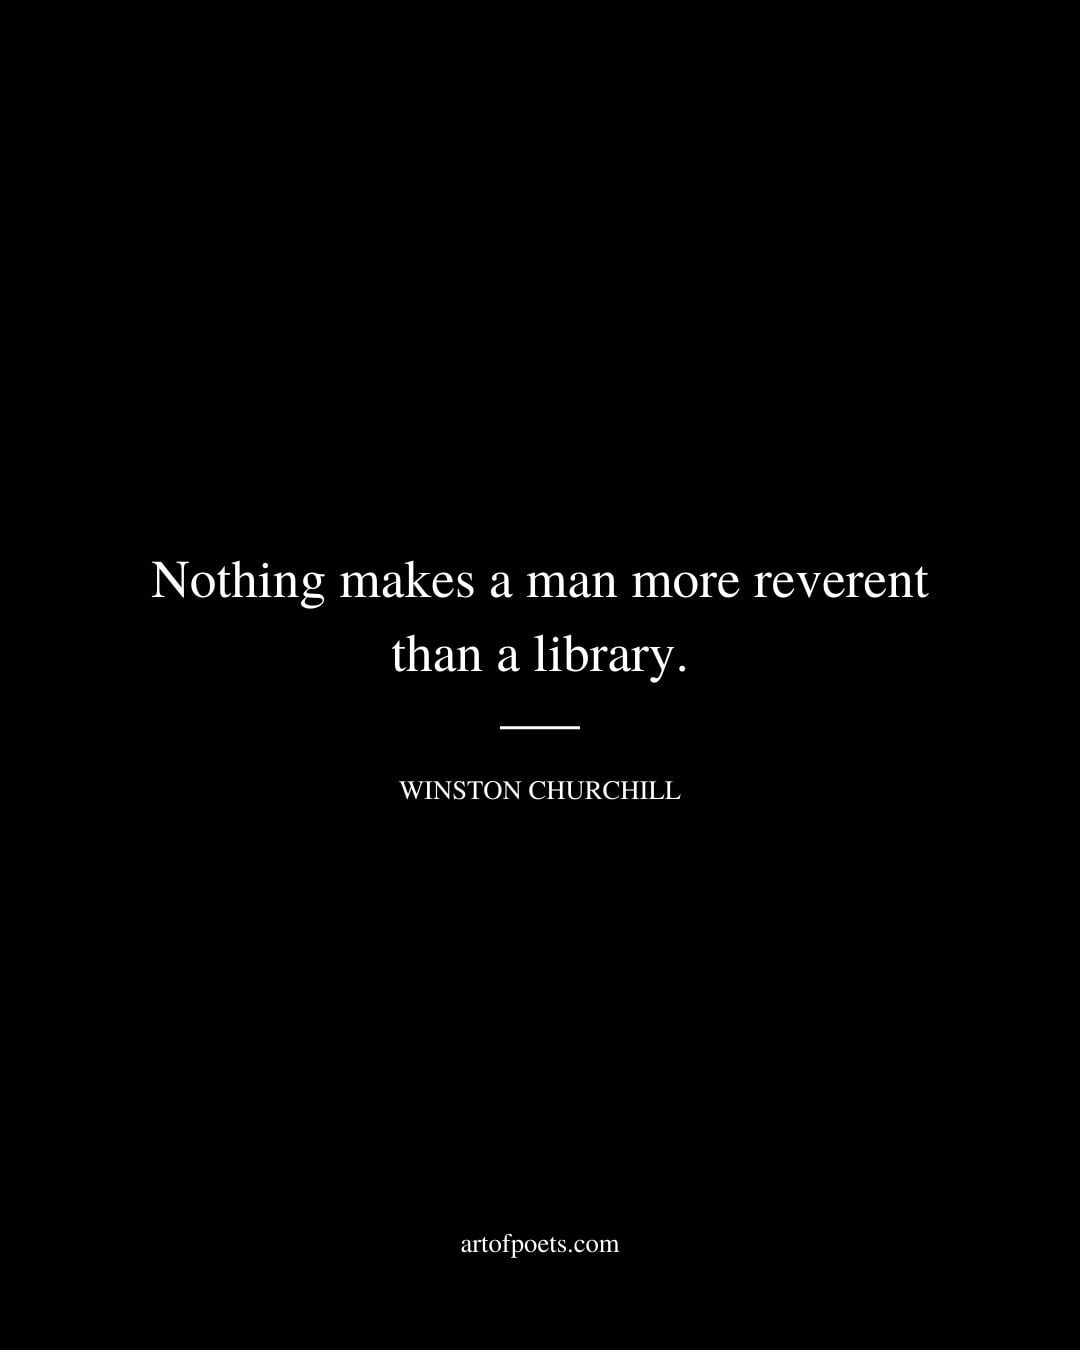 Nothing makes a man more reverent than a library